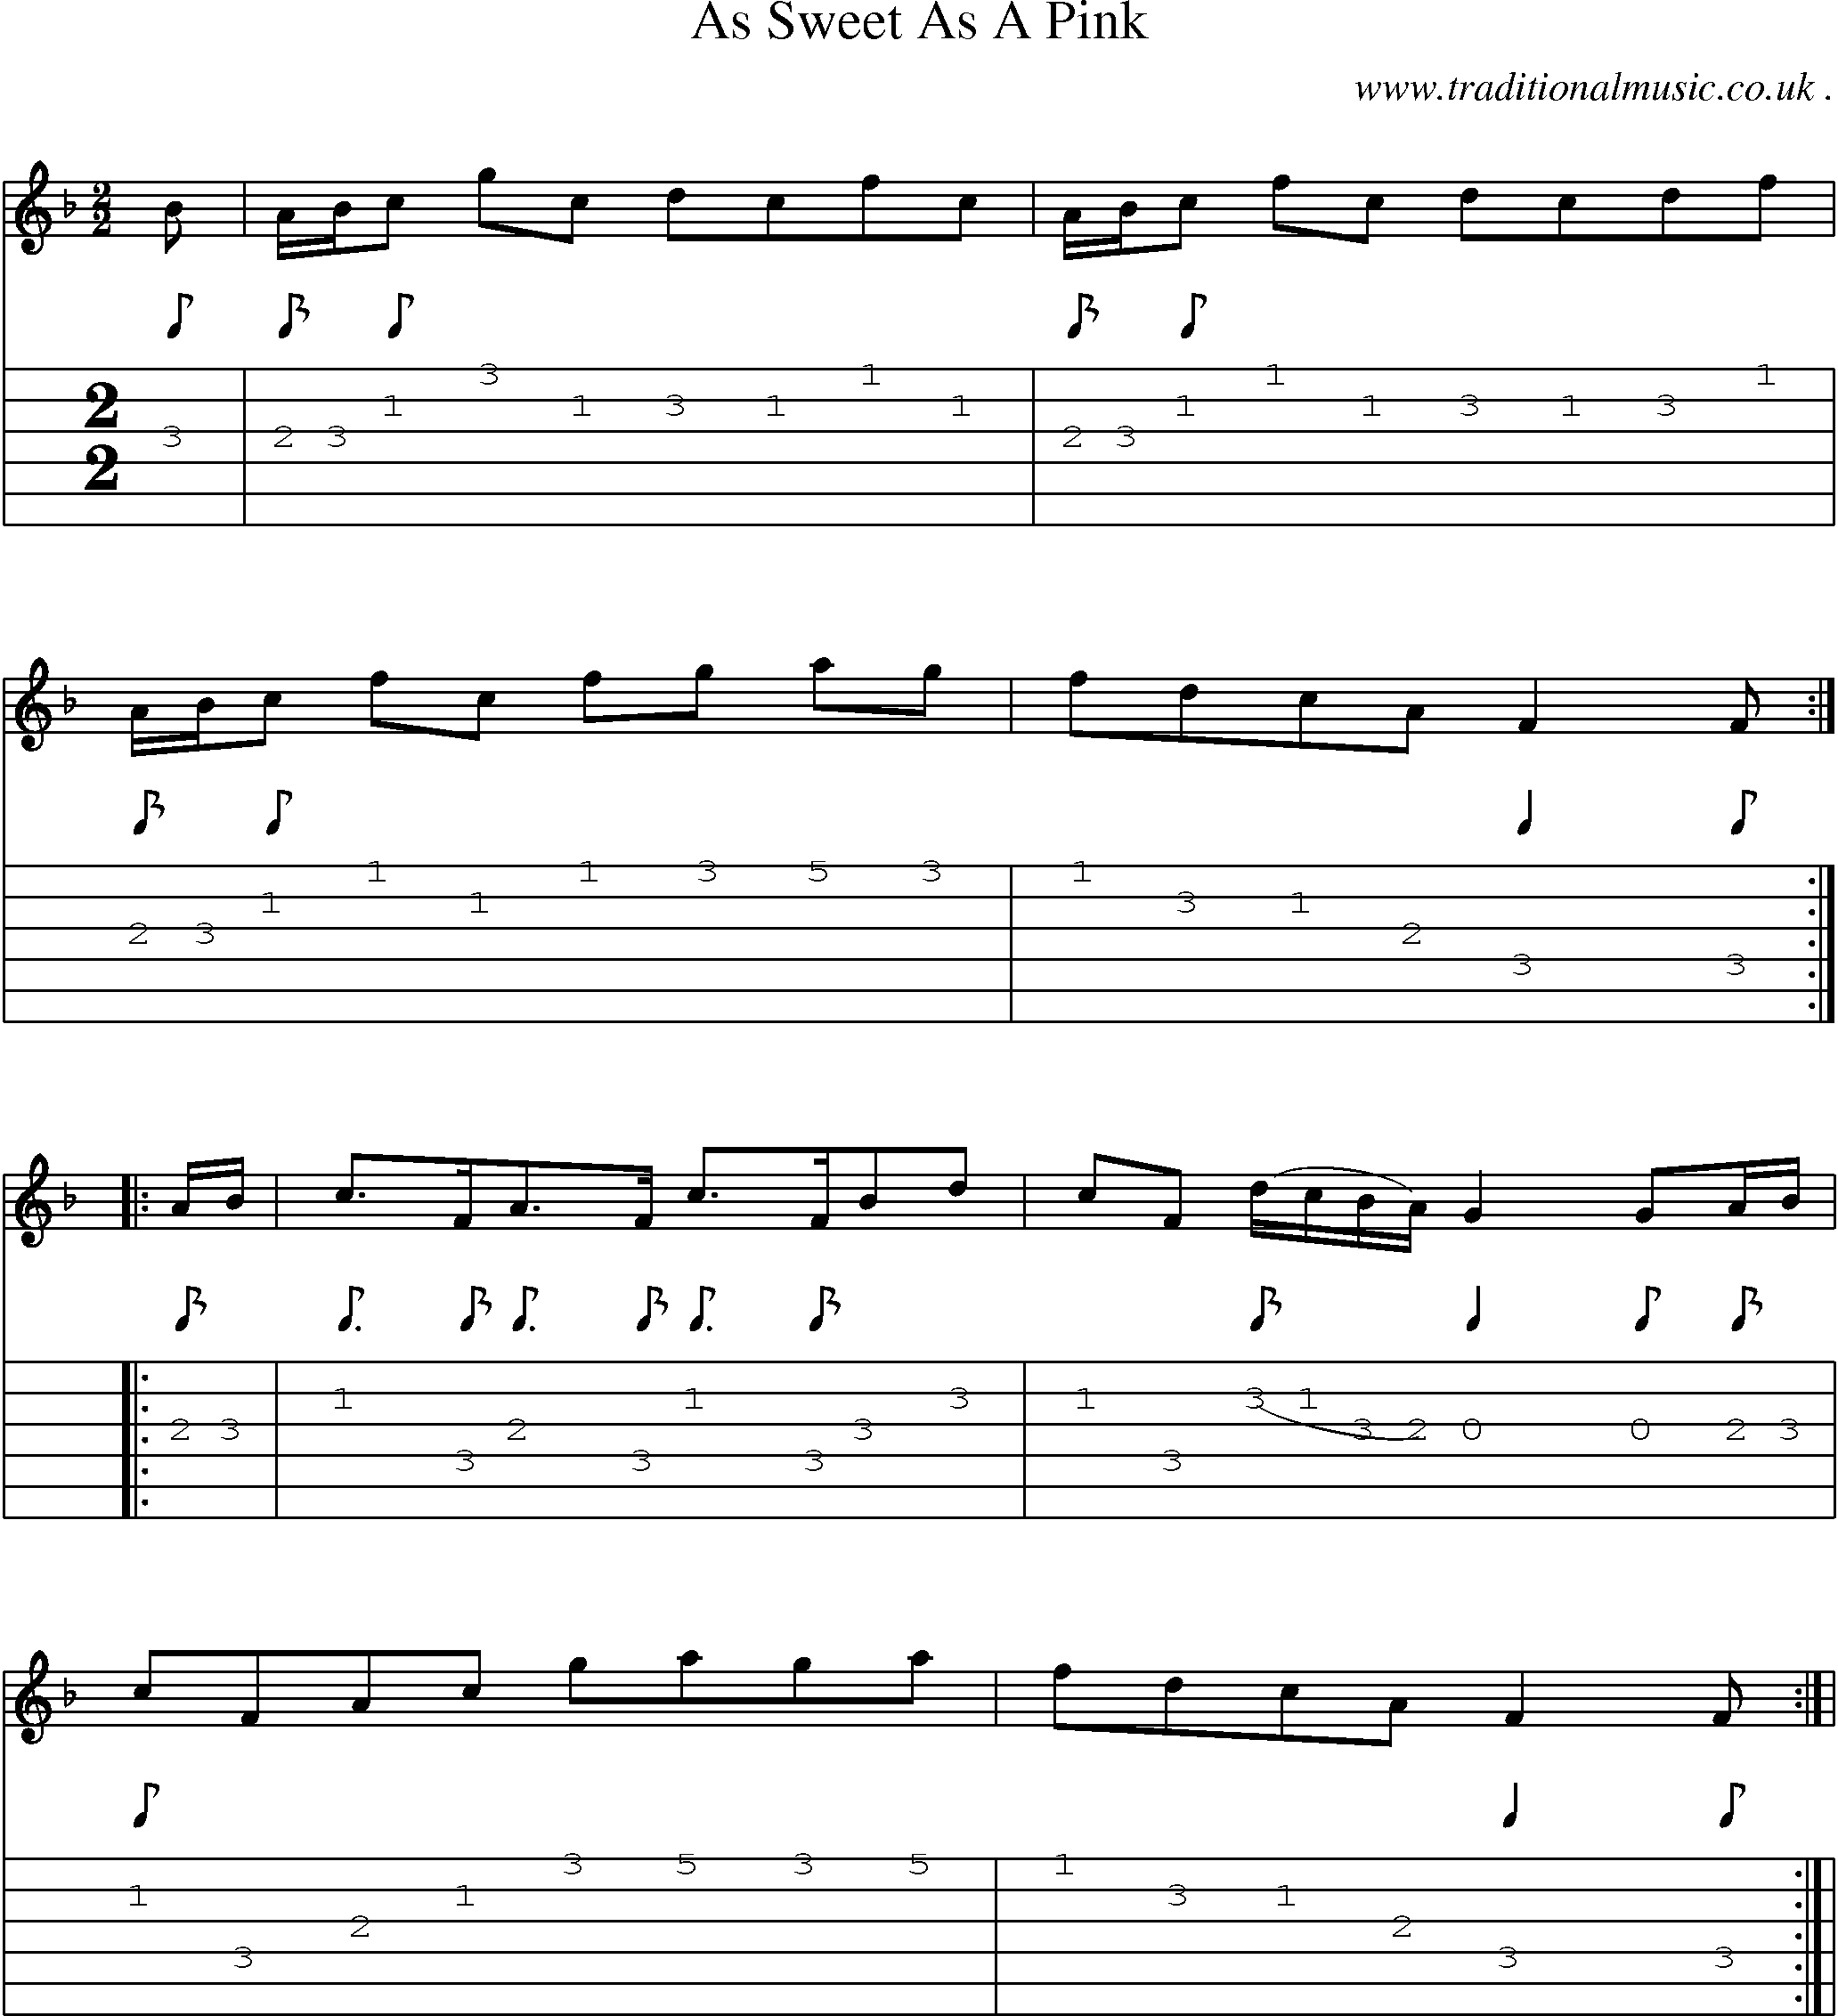 Sheet-Music and Guitar Tabs for As Sweet As A Pinkgigg